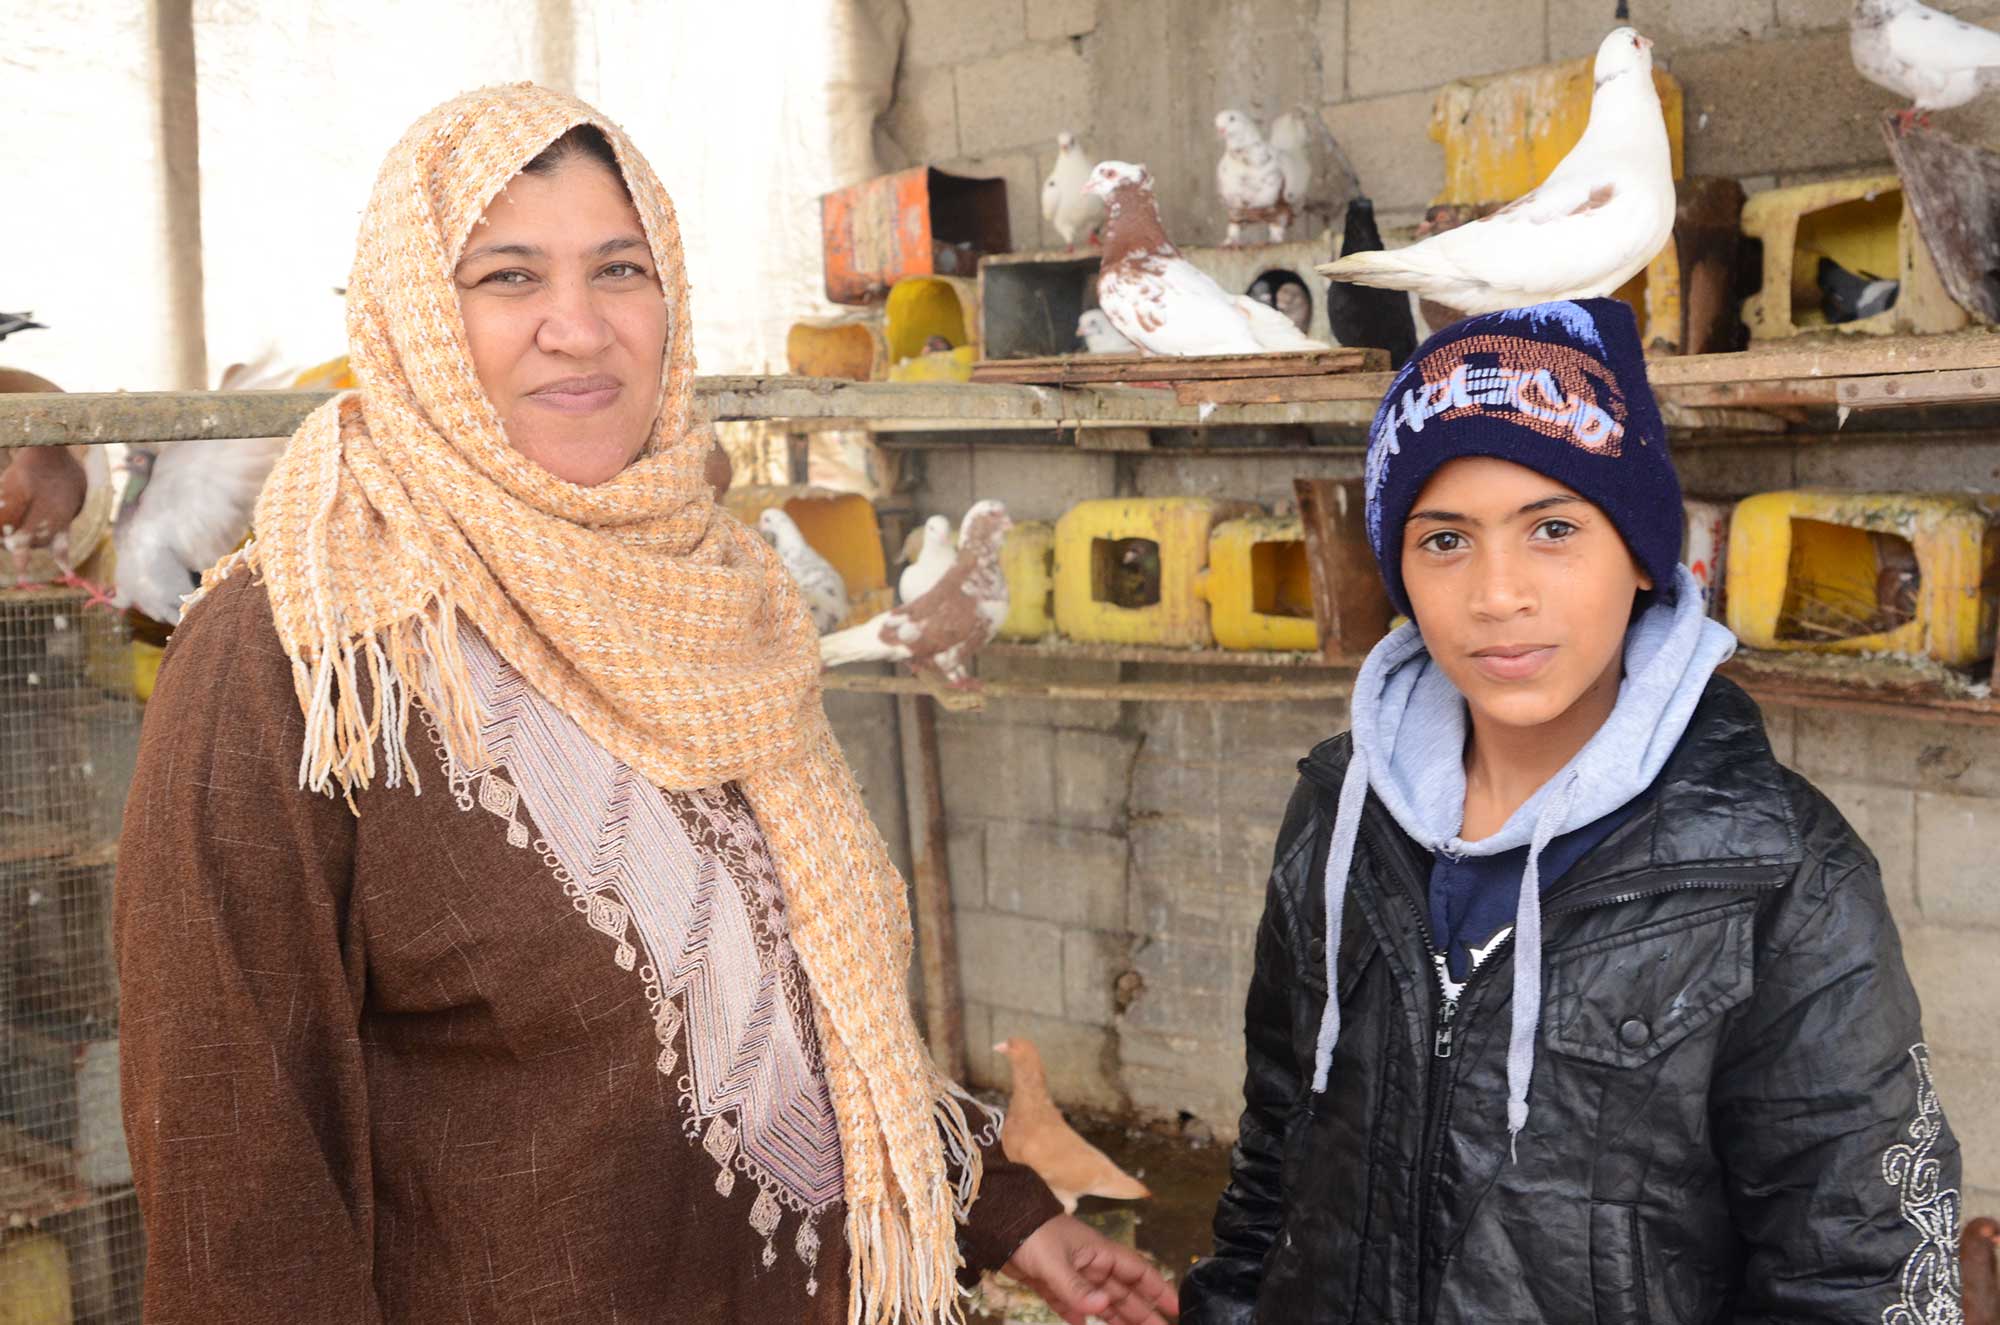 Hanan’s young son, Ismail, helps her feed and water their livestock. The water connection has enabled Hanan to maintain the family’s livelihood.